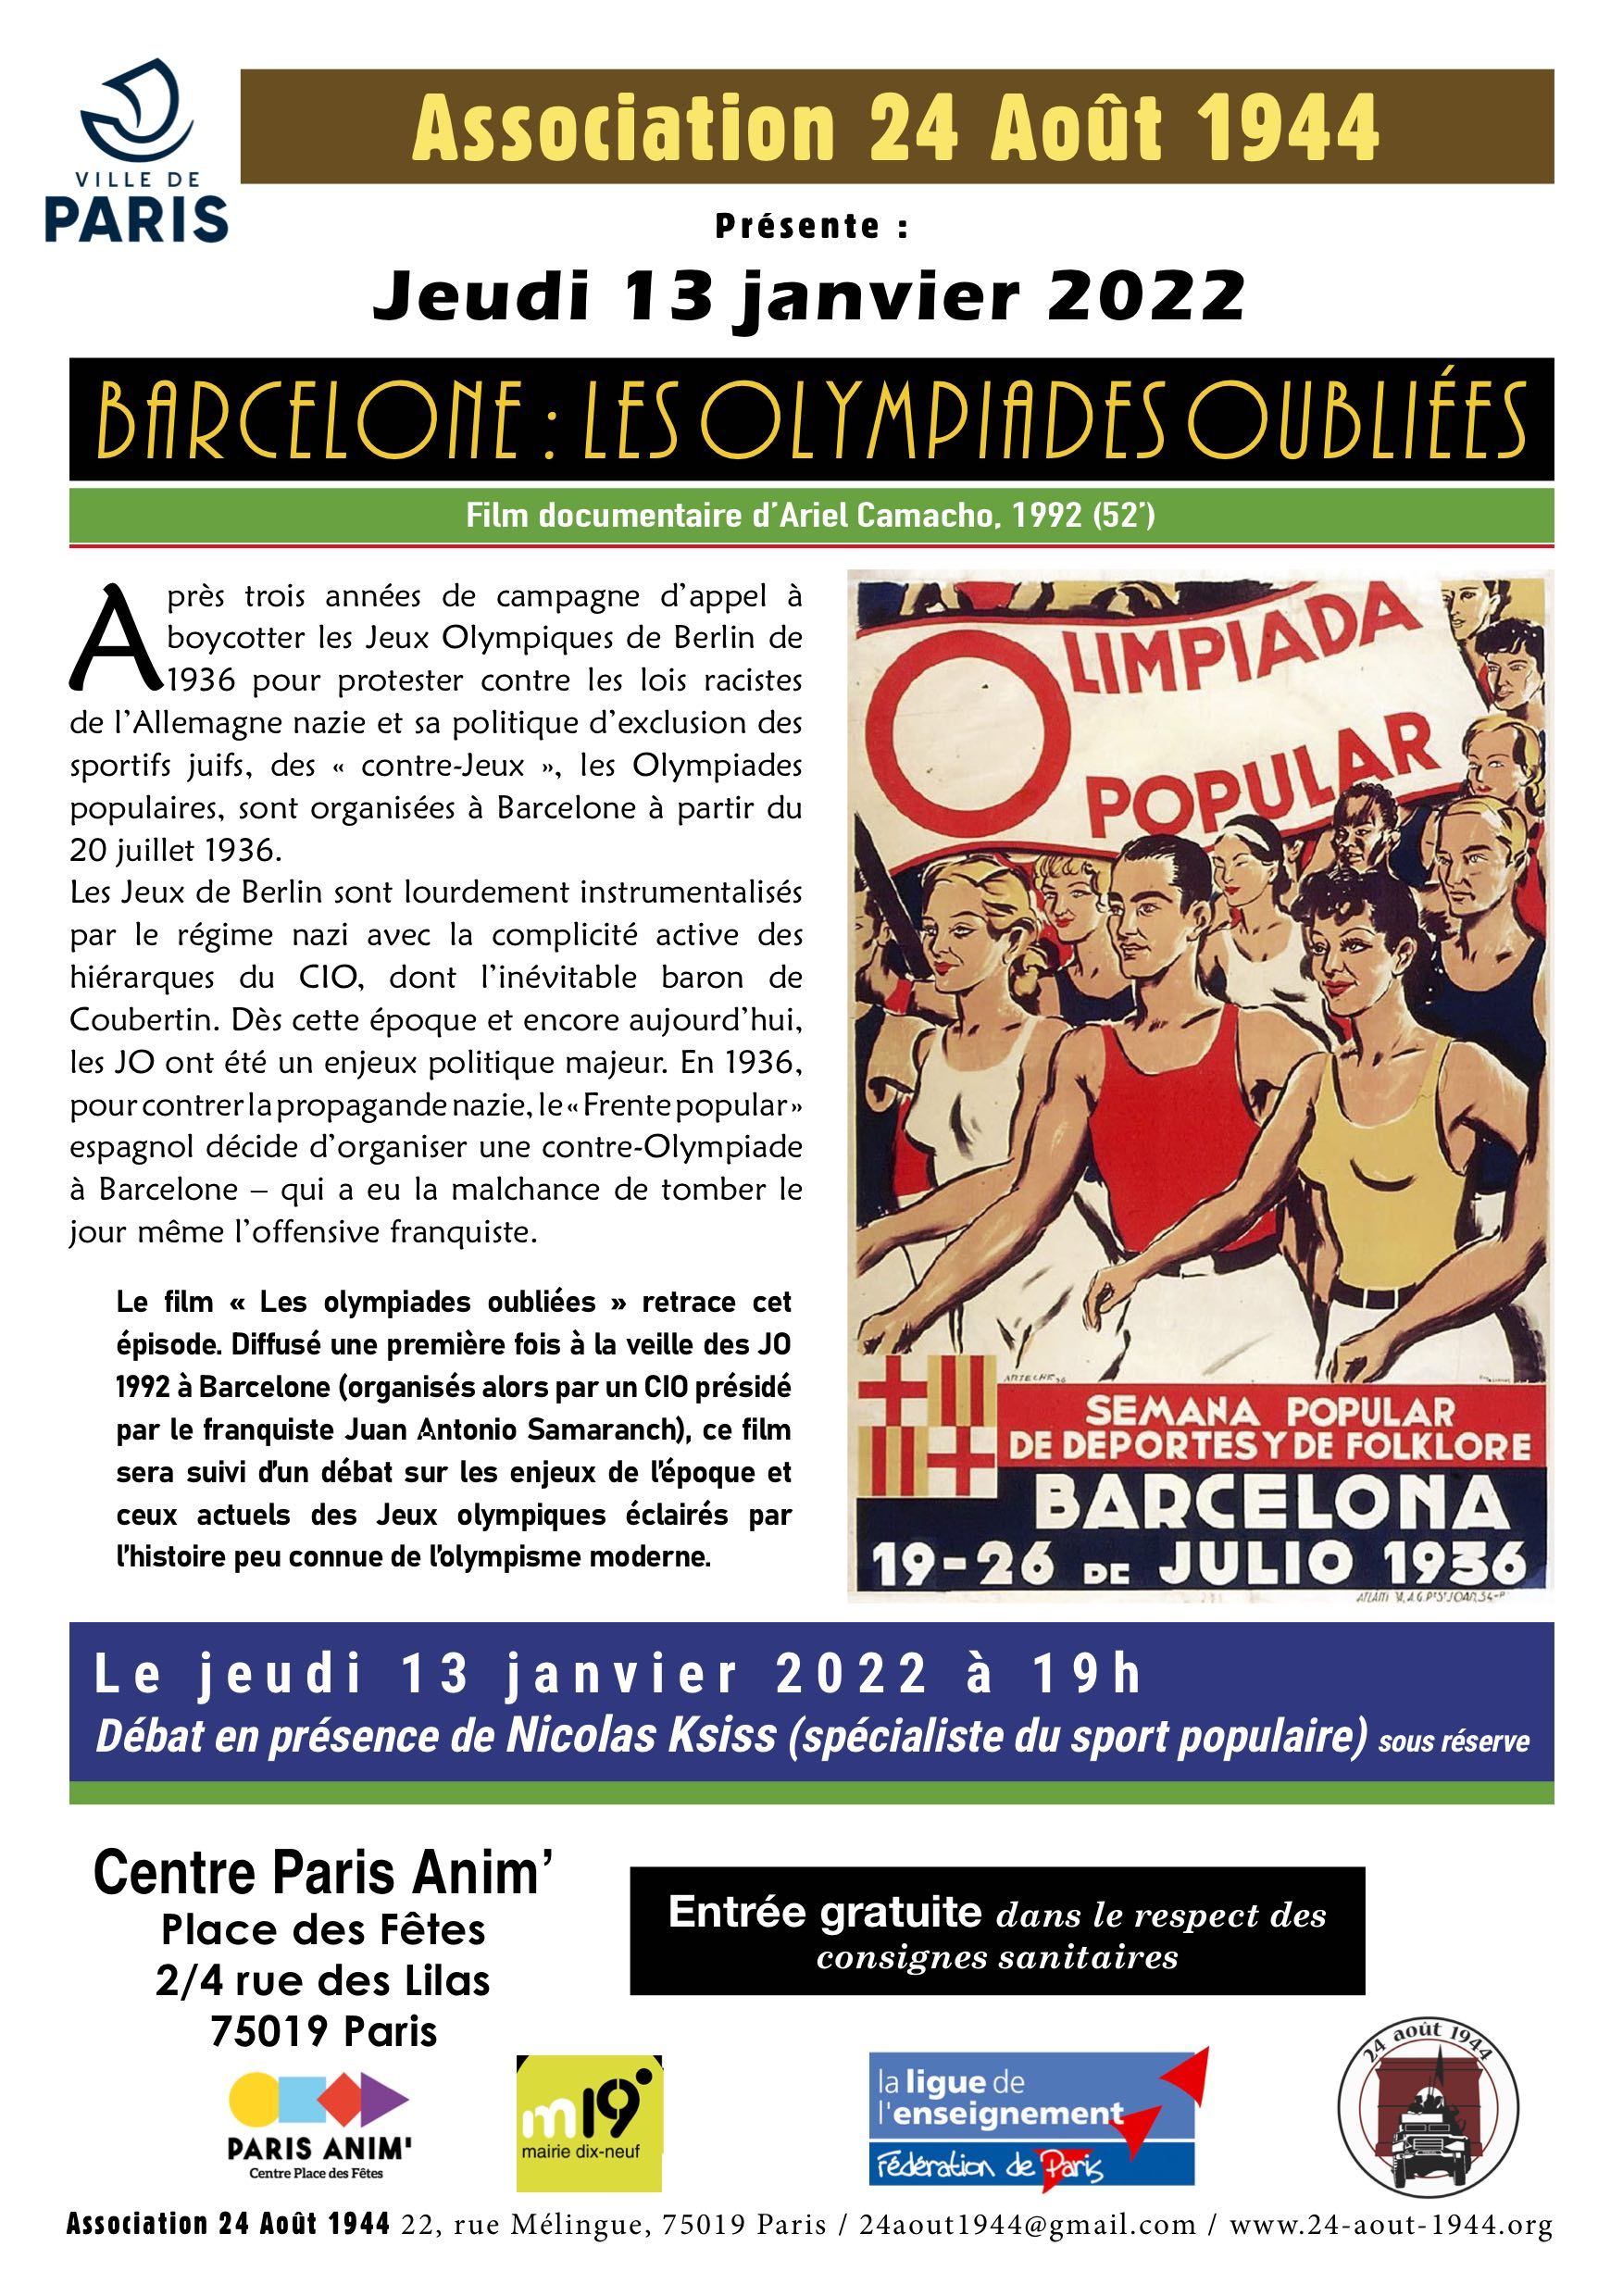 1936_les_olympiades_oubliees_aff_a4_-_copie.jpg